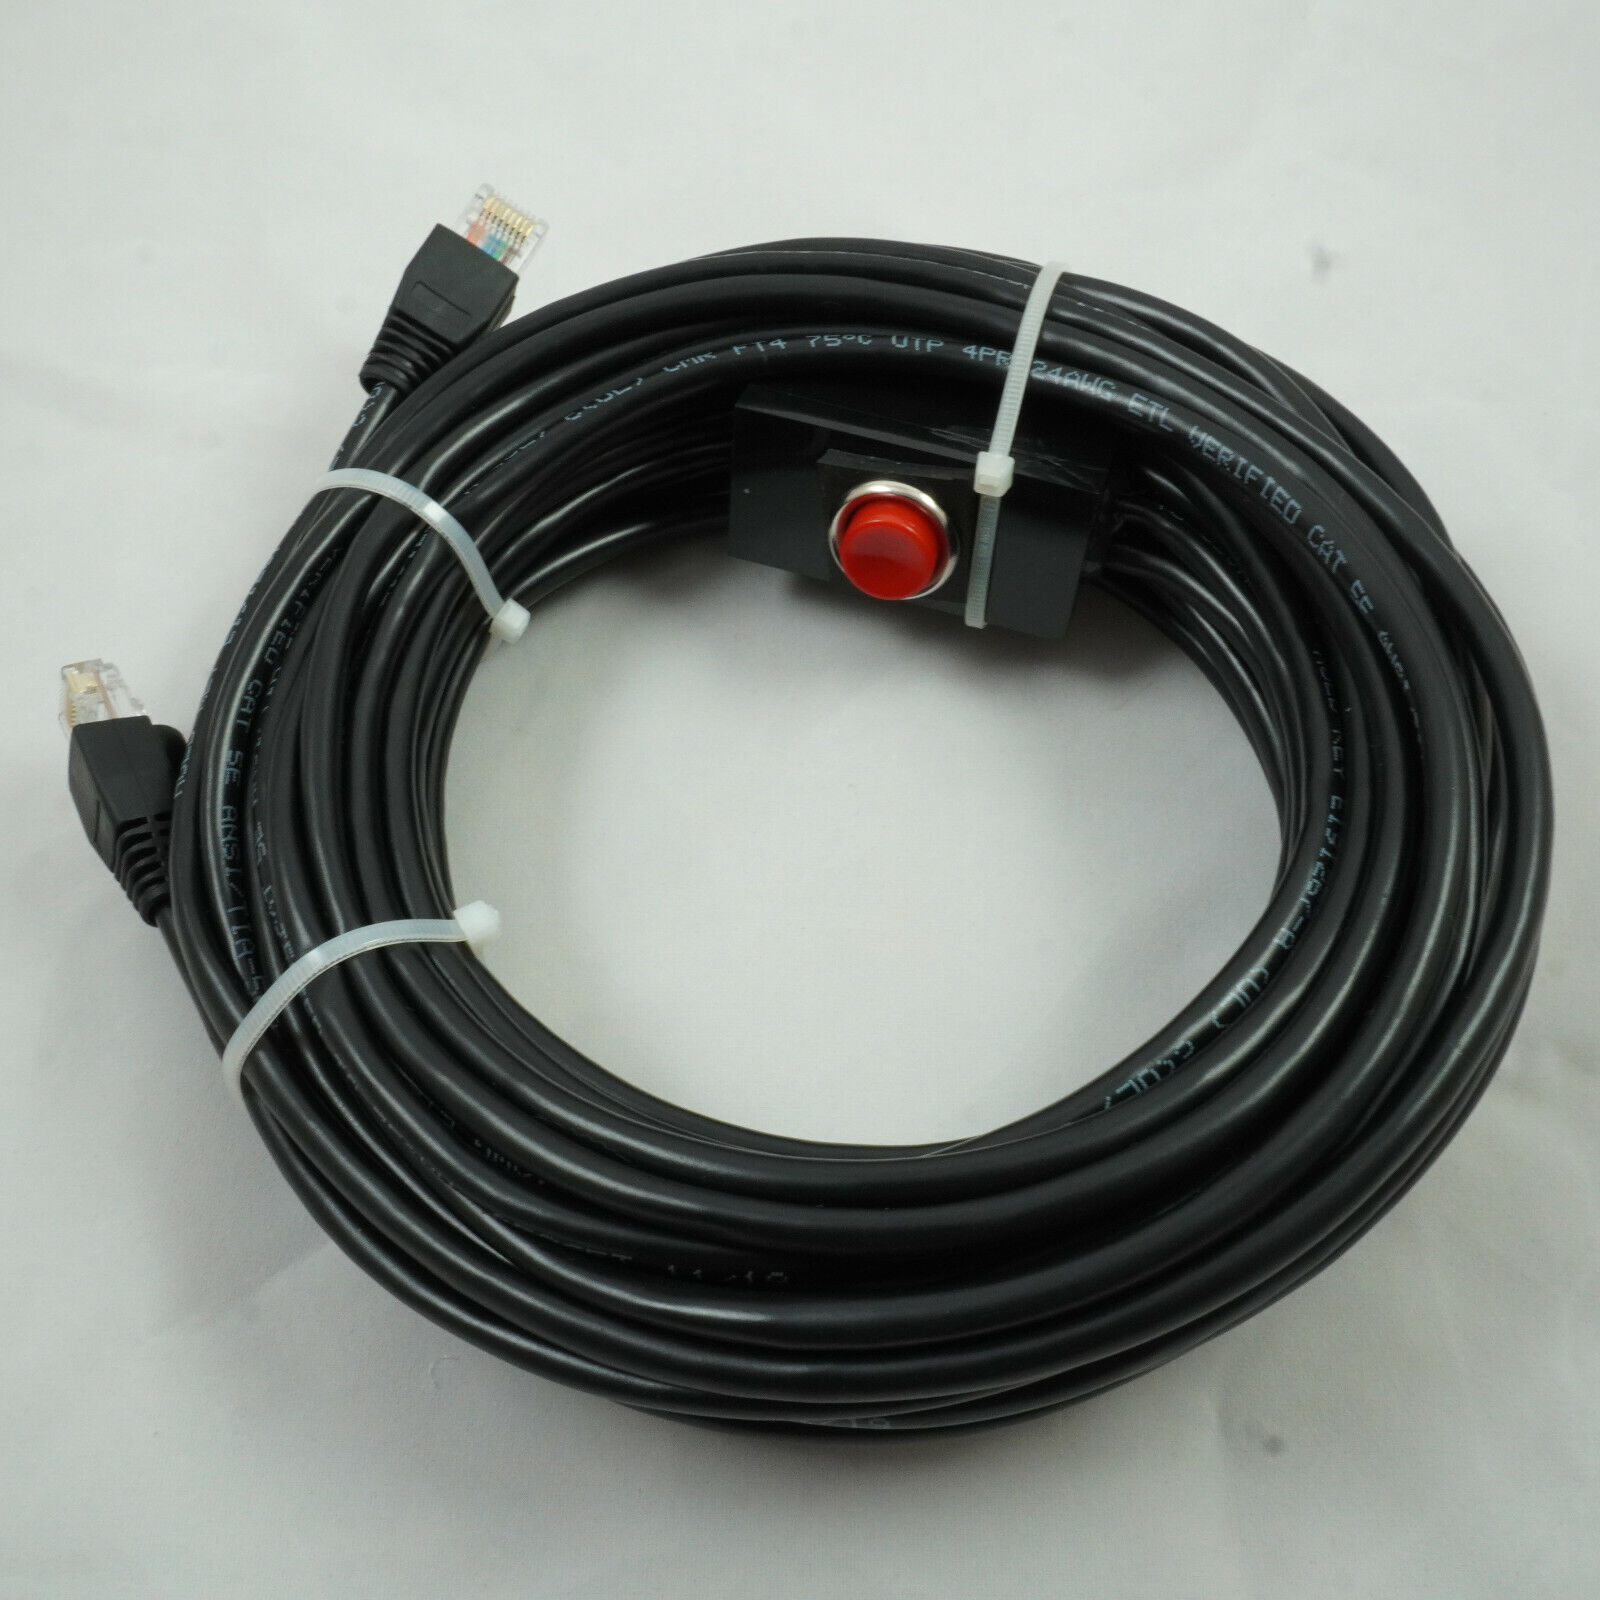 50' Big Button Momentary Lag Switch for PSV, PS4, PS3, Xbox One, 360 & PC